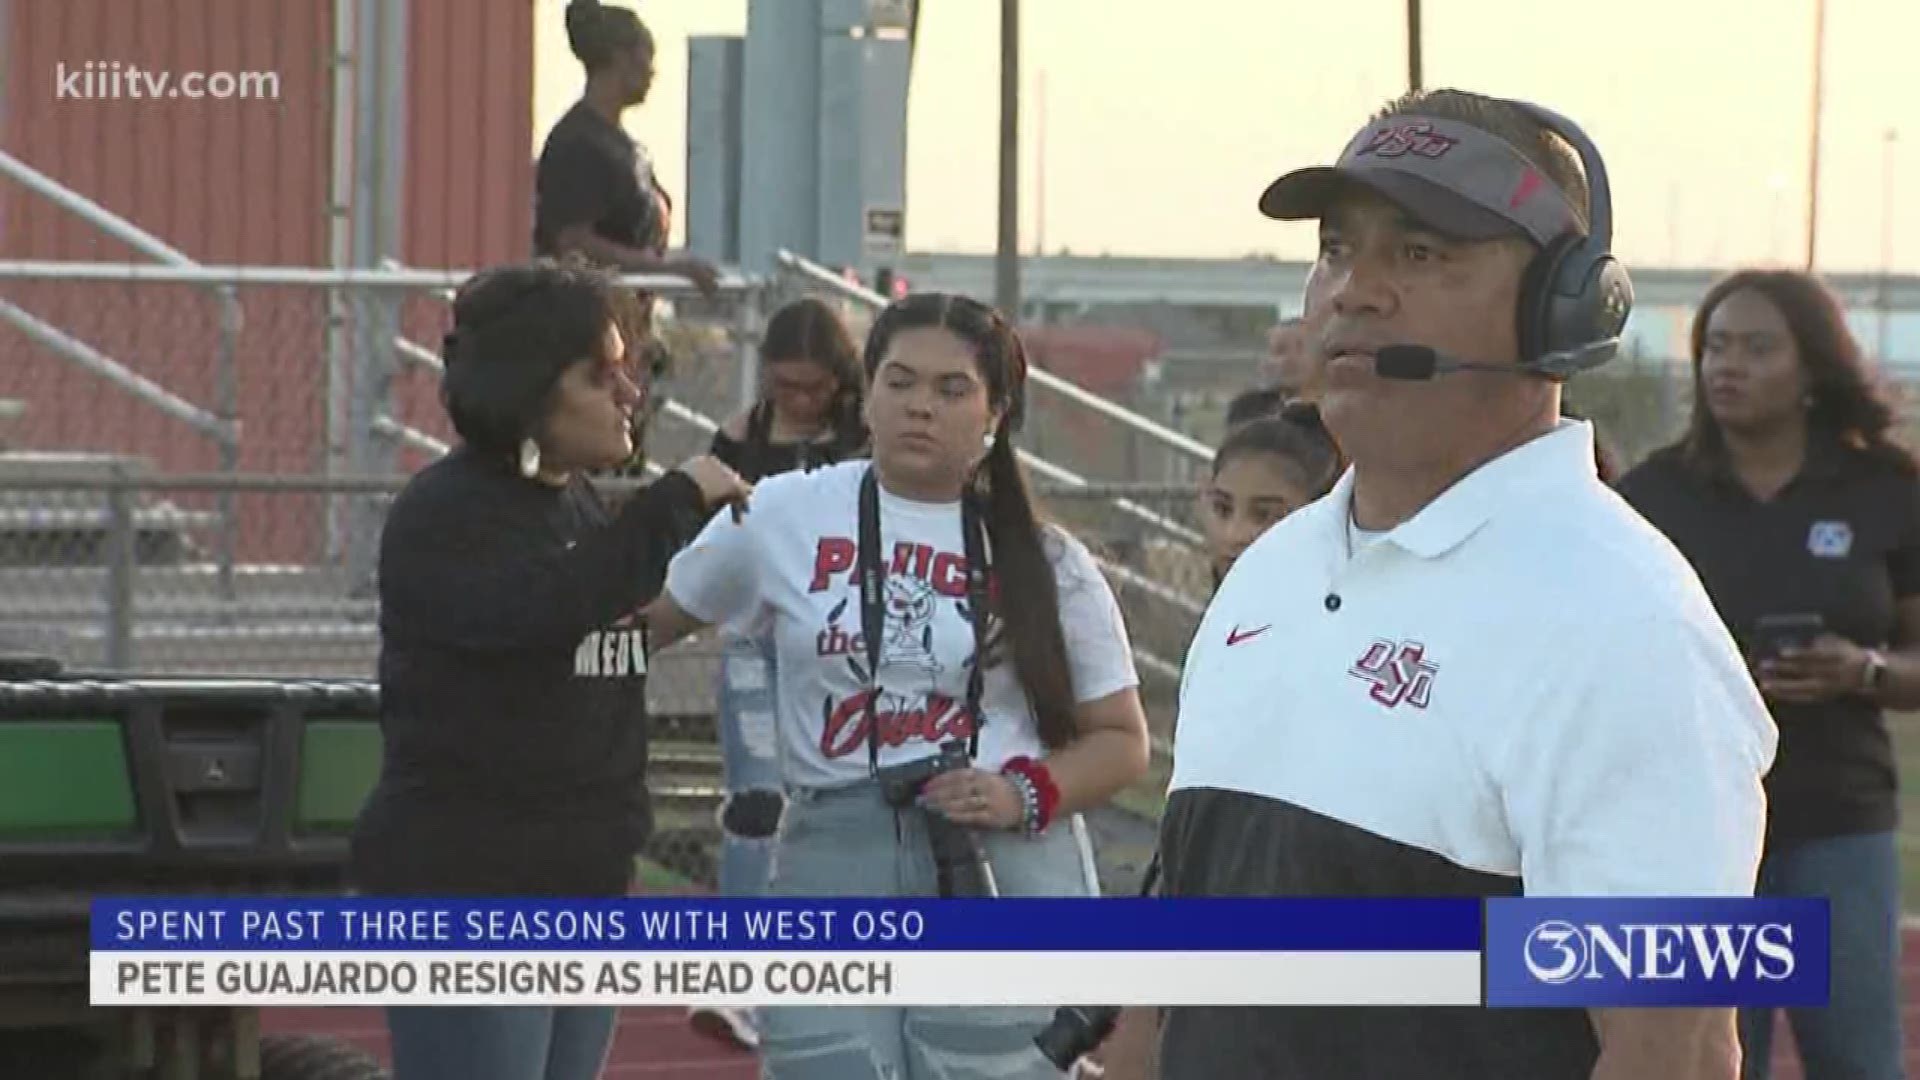 A source with West Oso has confirmed with 3News that head football coach Pete Guajardo has resigned from his position after three seasons with the program.